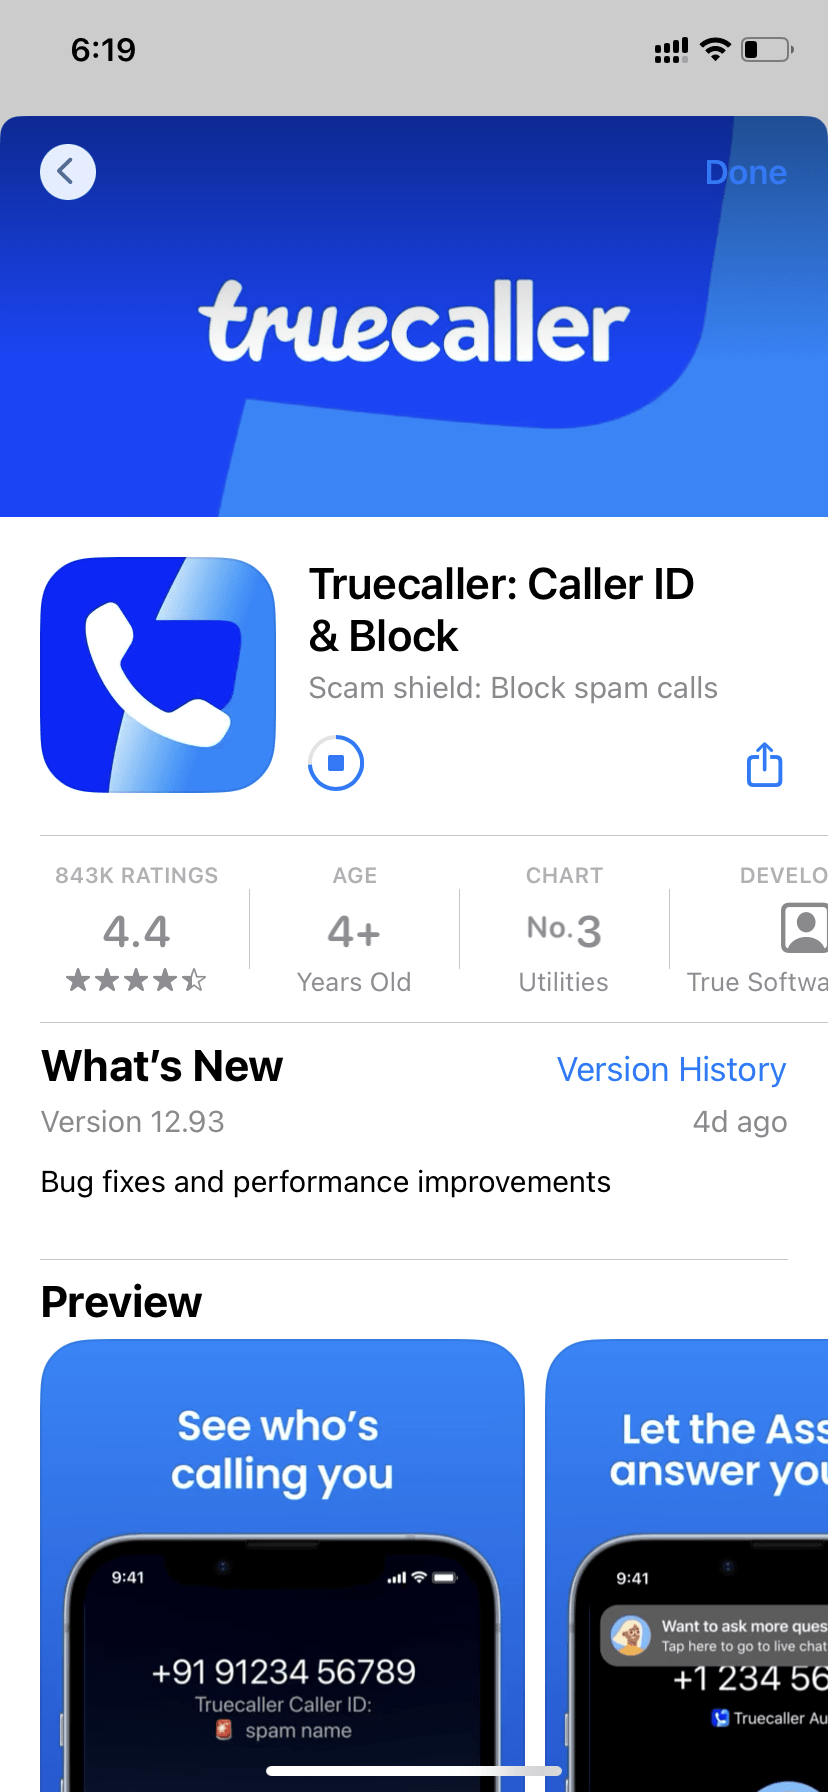 The update will download and install automatically. Once the update is complete, try if the caller ID feature is working again.